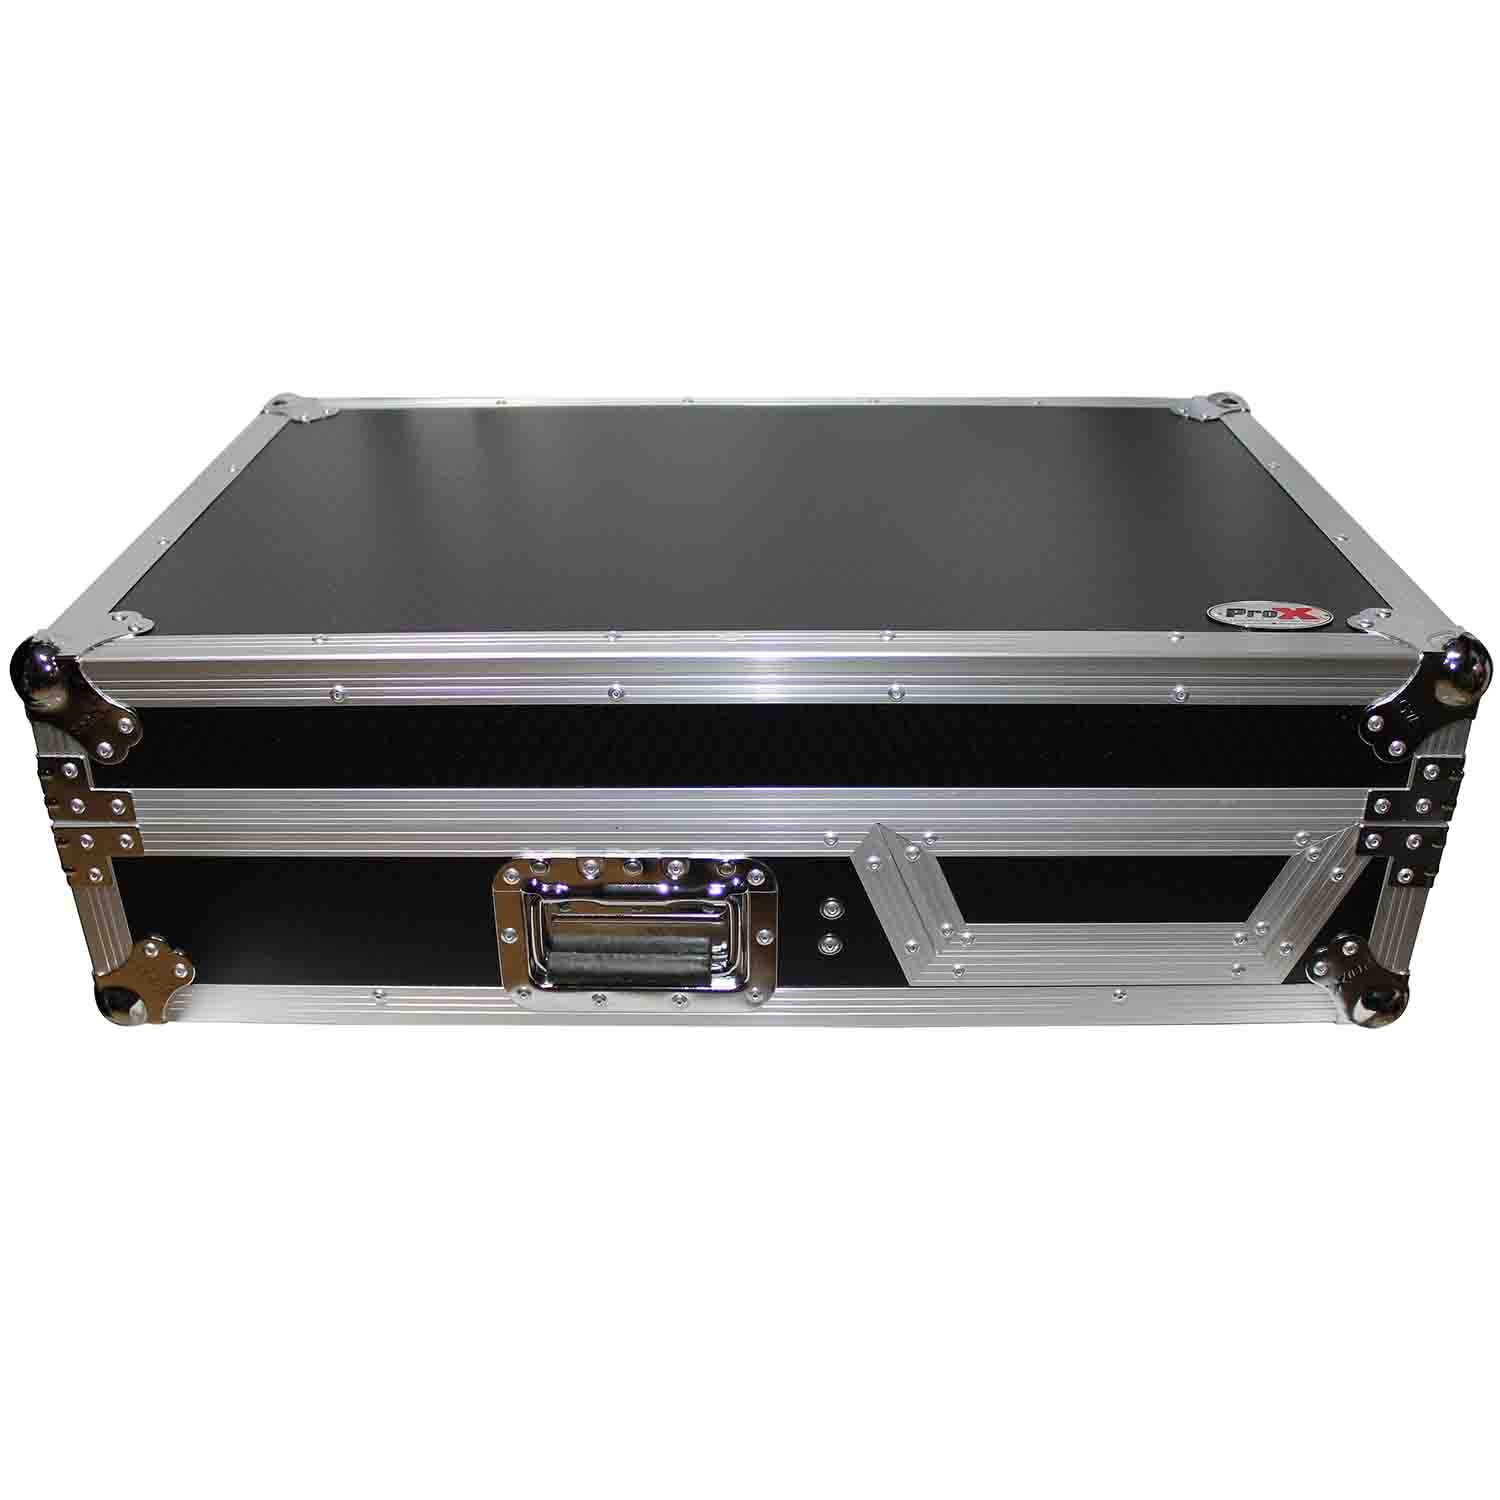 ProX XS-TMC1012W DJ Flight Case For Single Turntable In Battle Mode and 10 Inch or 12 Inch Mixer - Hollywood DJ